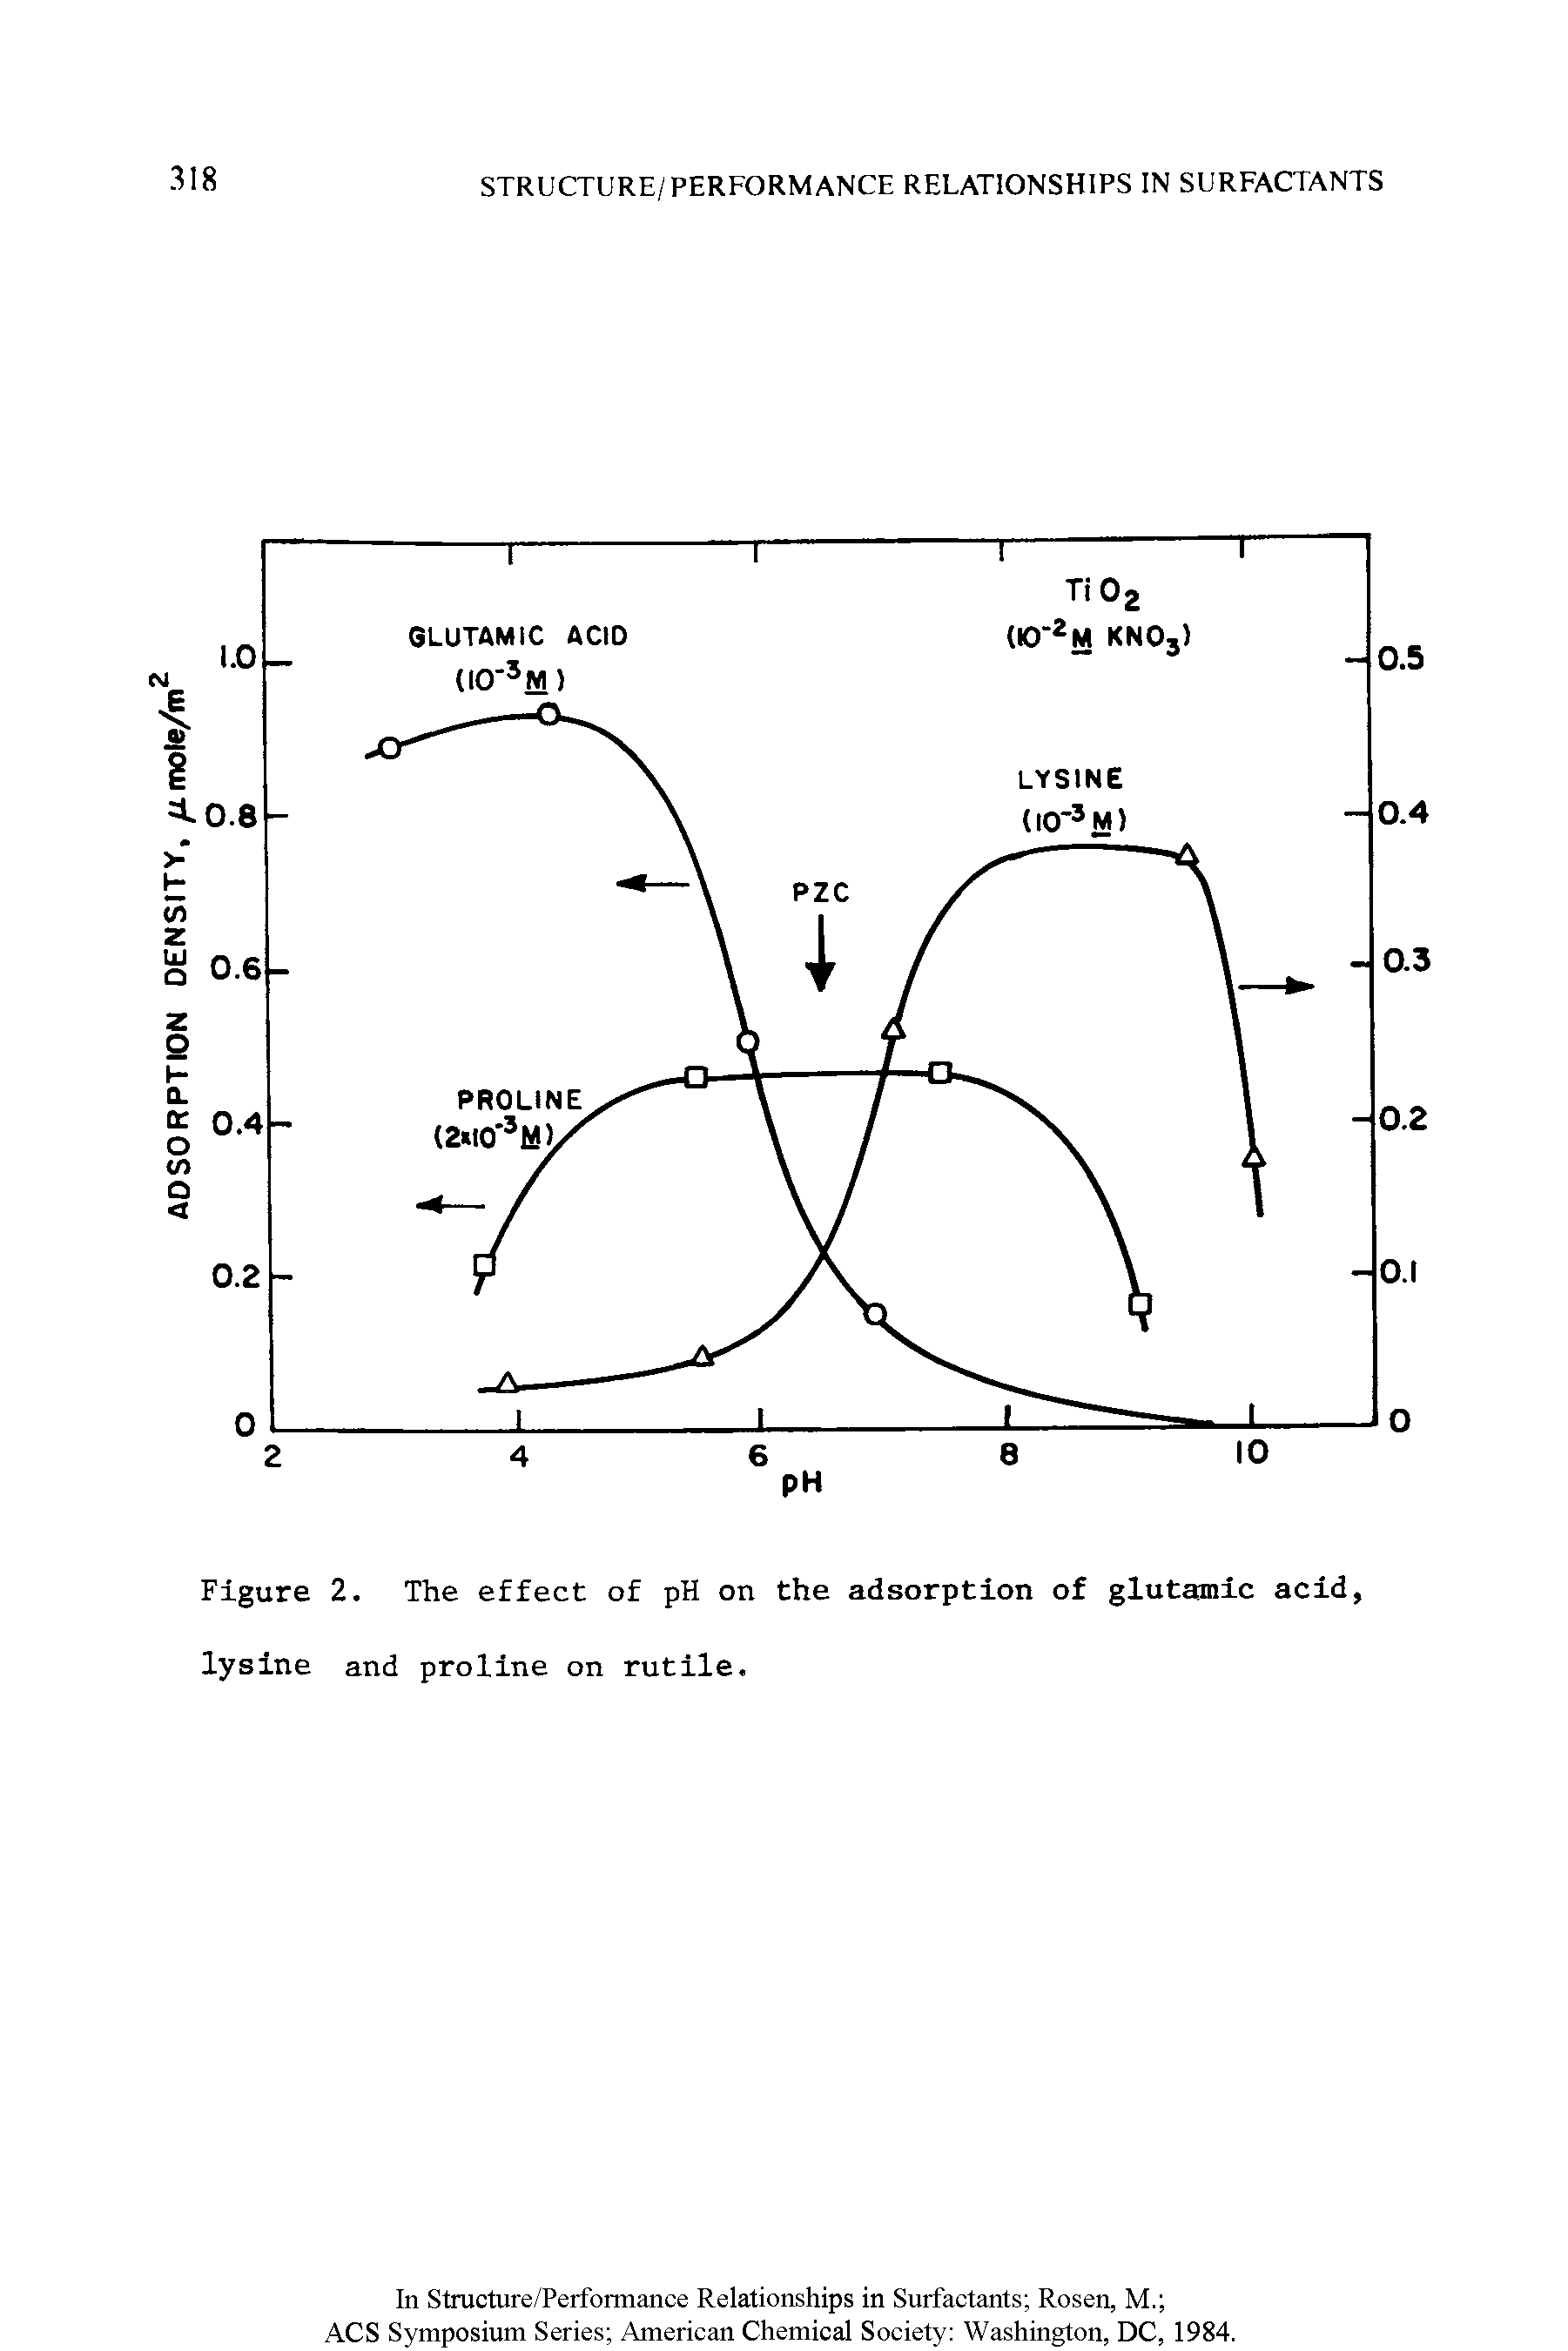 Figure 2. The effect of pH on the adsorption of glutamic acid, lysine and proline on rutile.